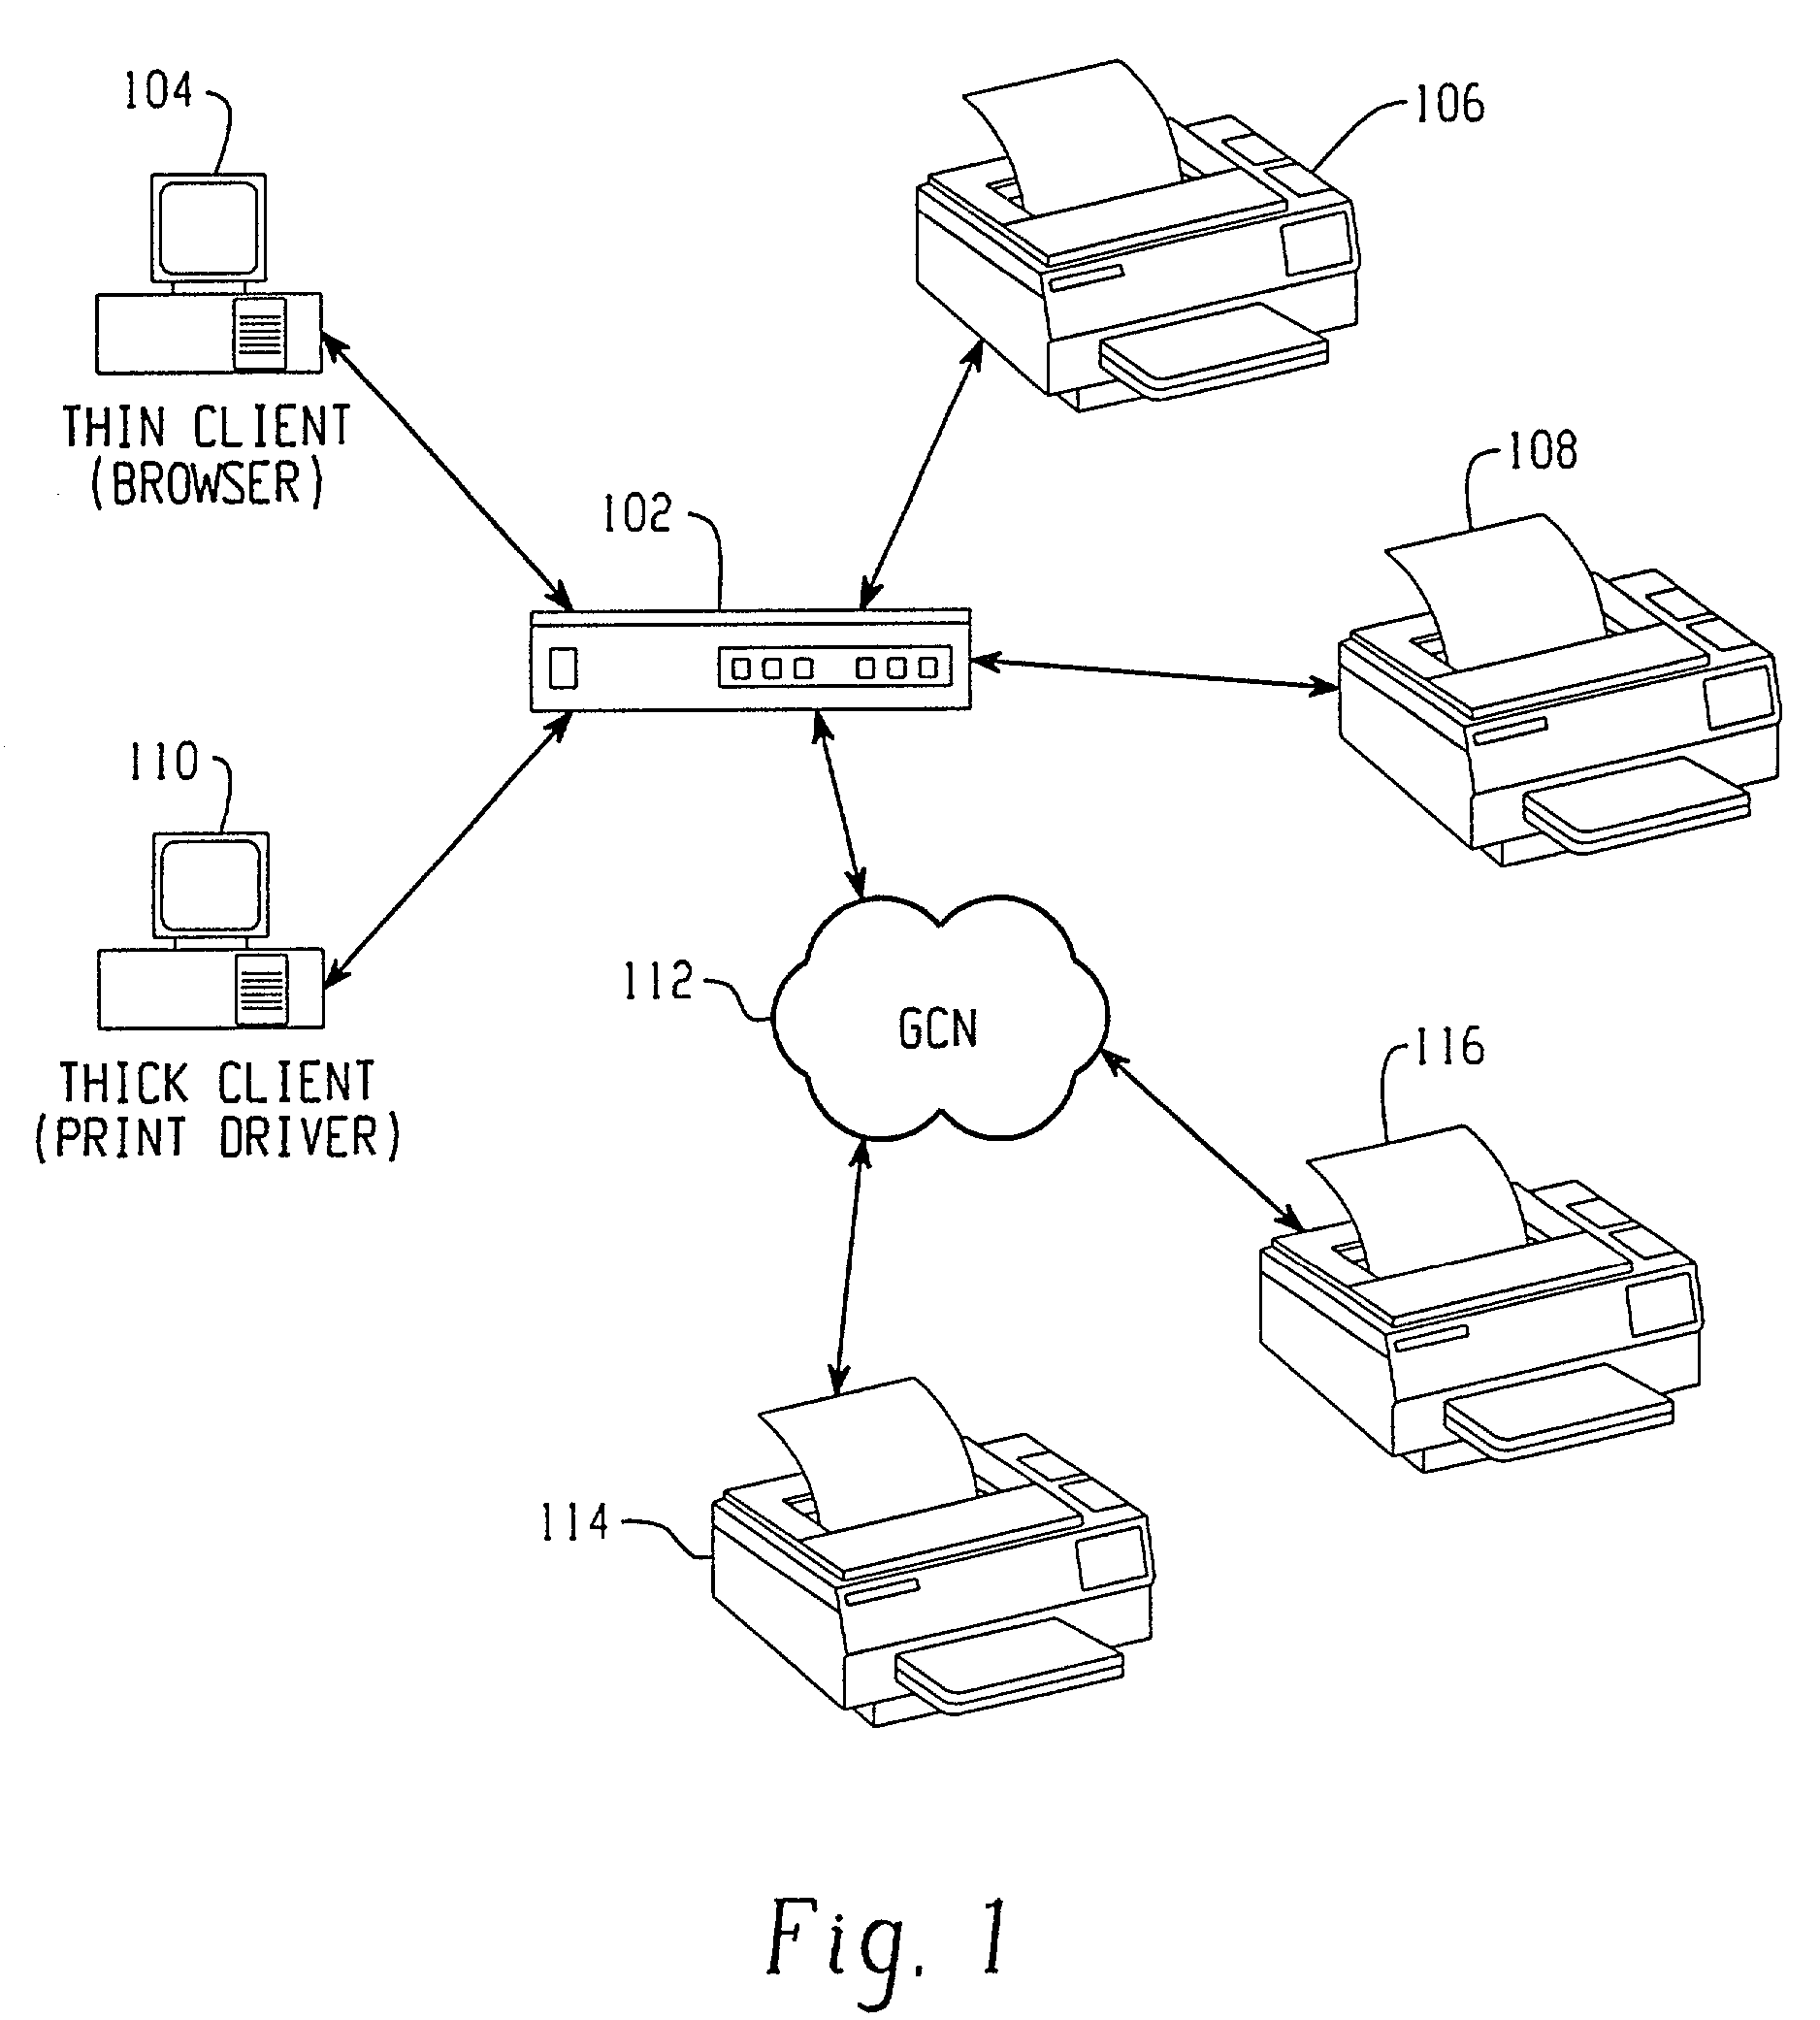 System and method for sending files to multiple destinations